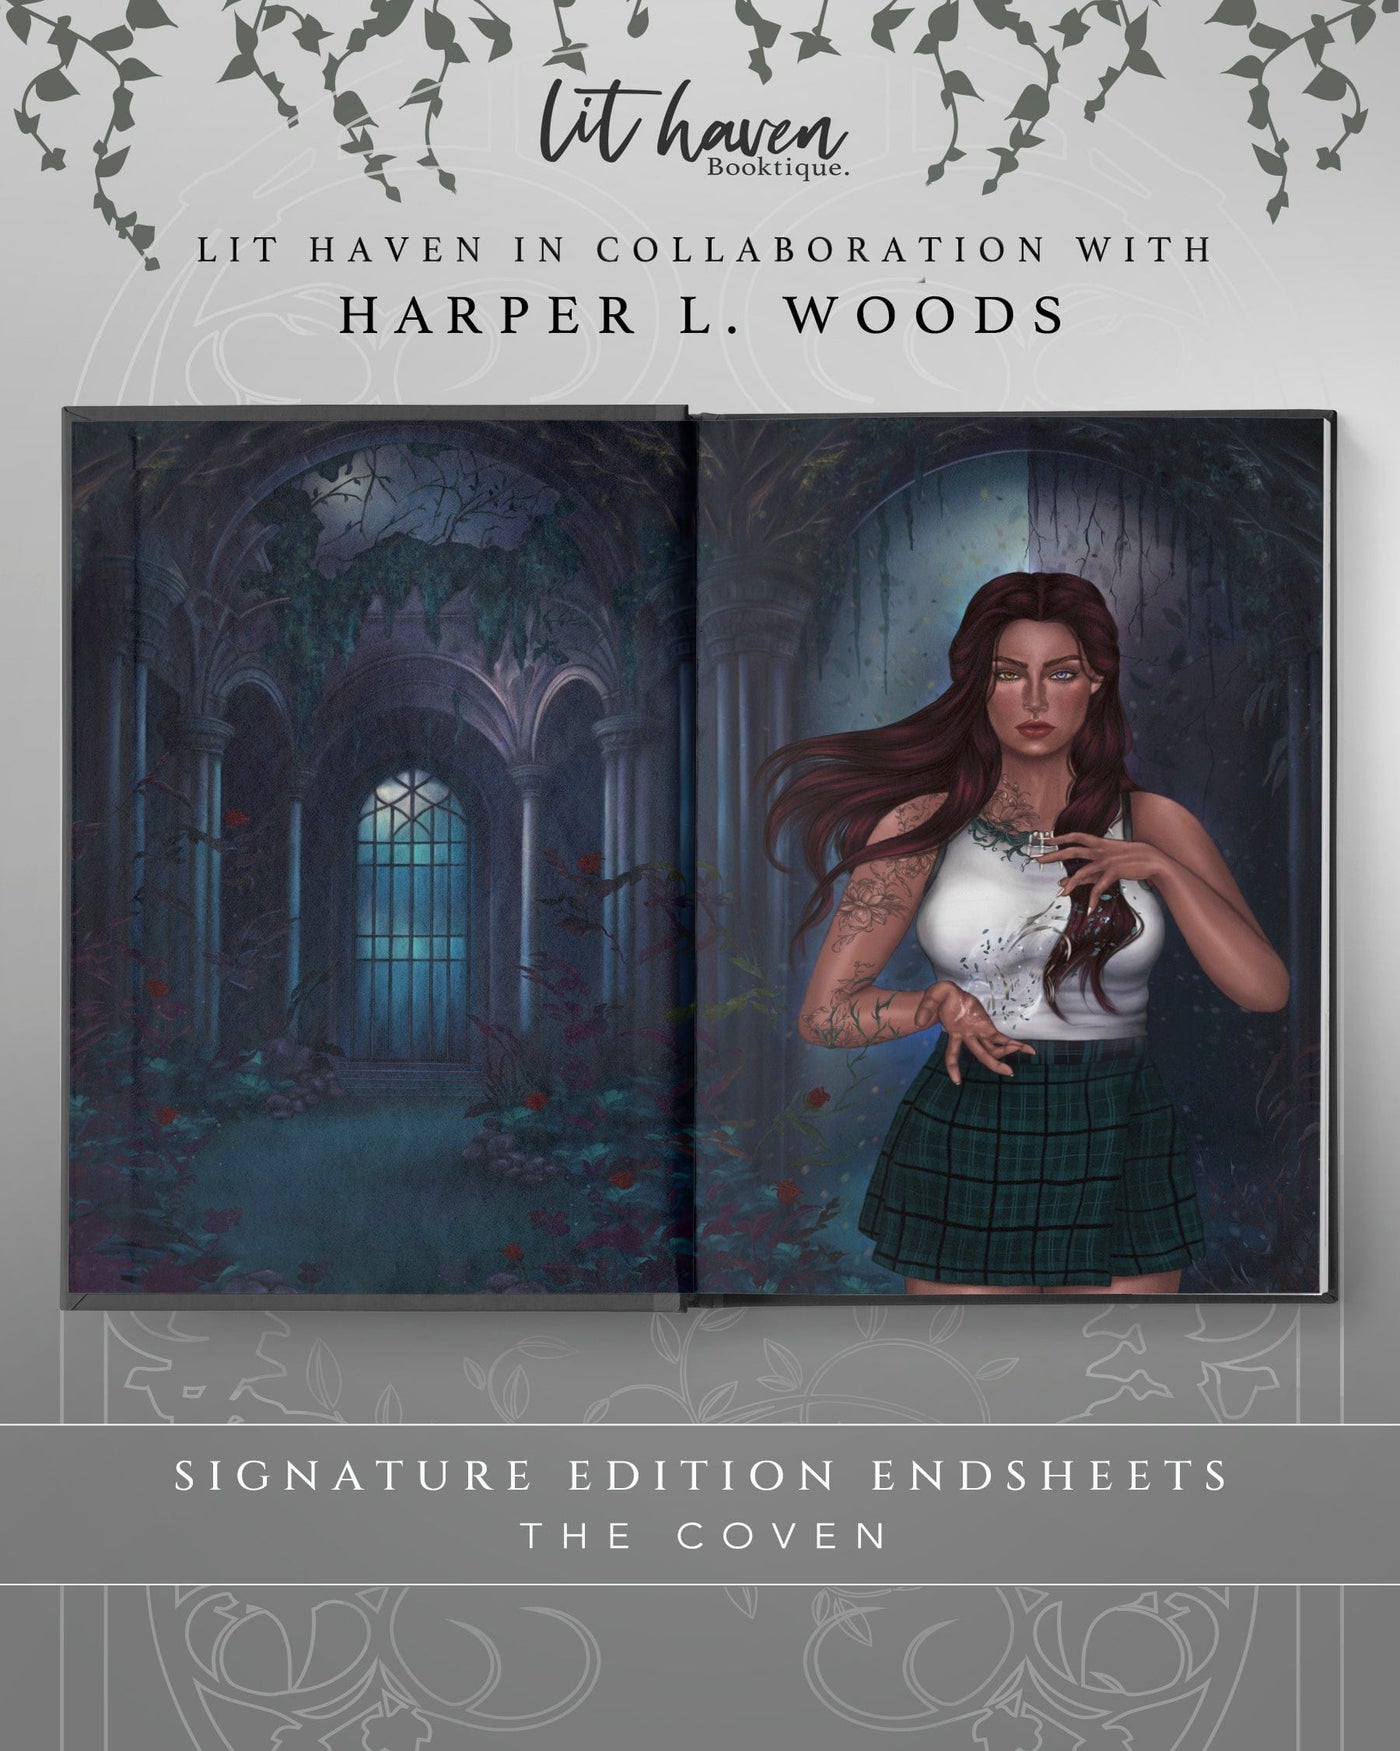 Lit Haven Booktique Book Preorder - The Coven Signature Edition